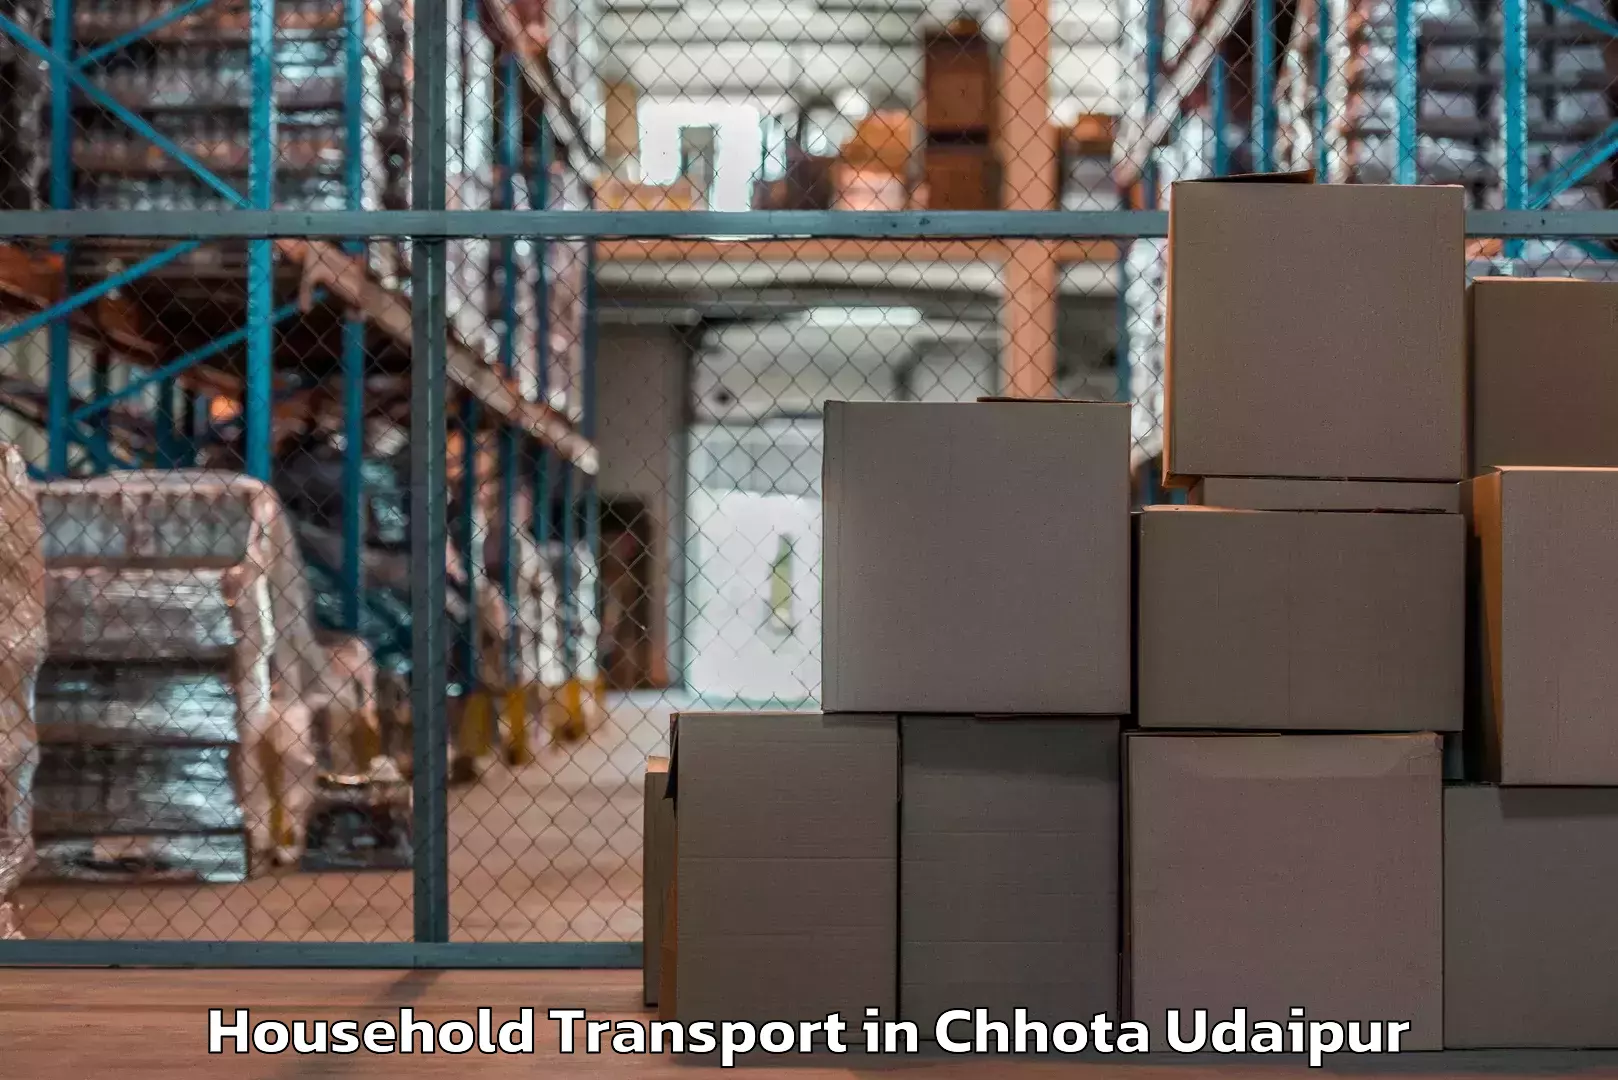 Furniture transport and storage in Chhota Udaipur